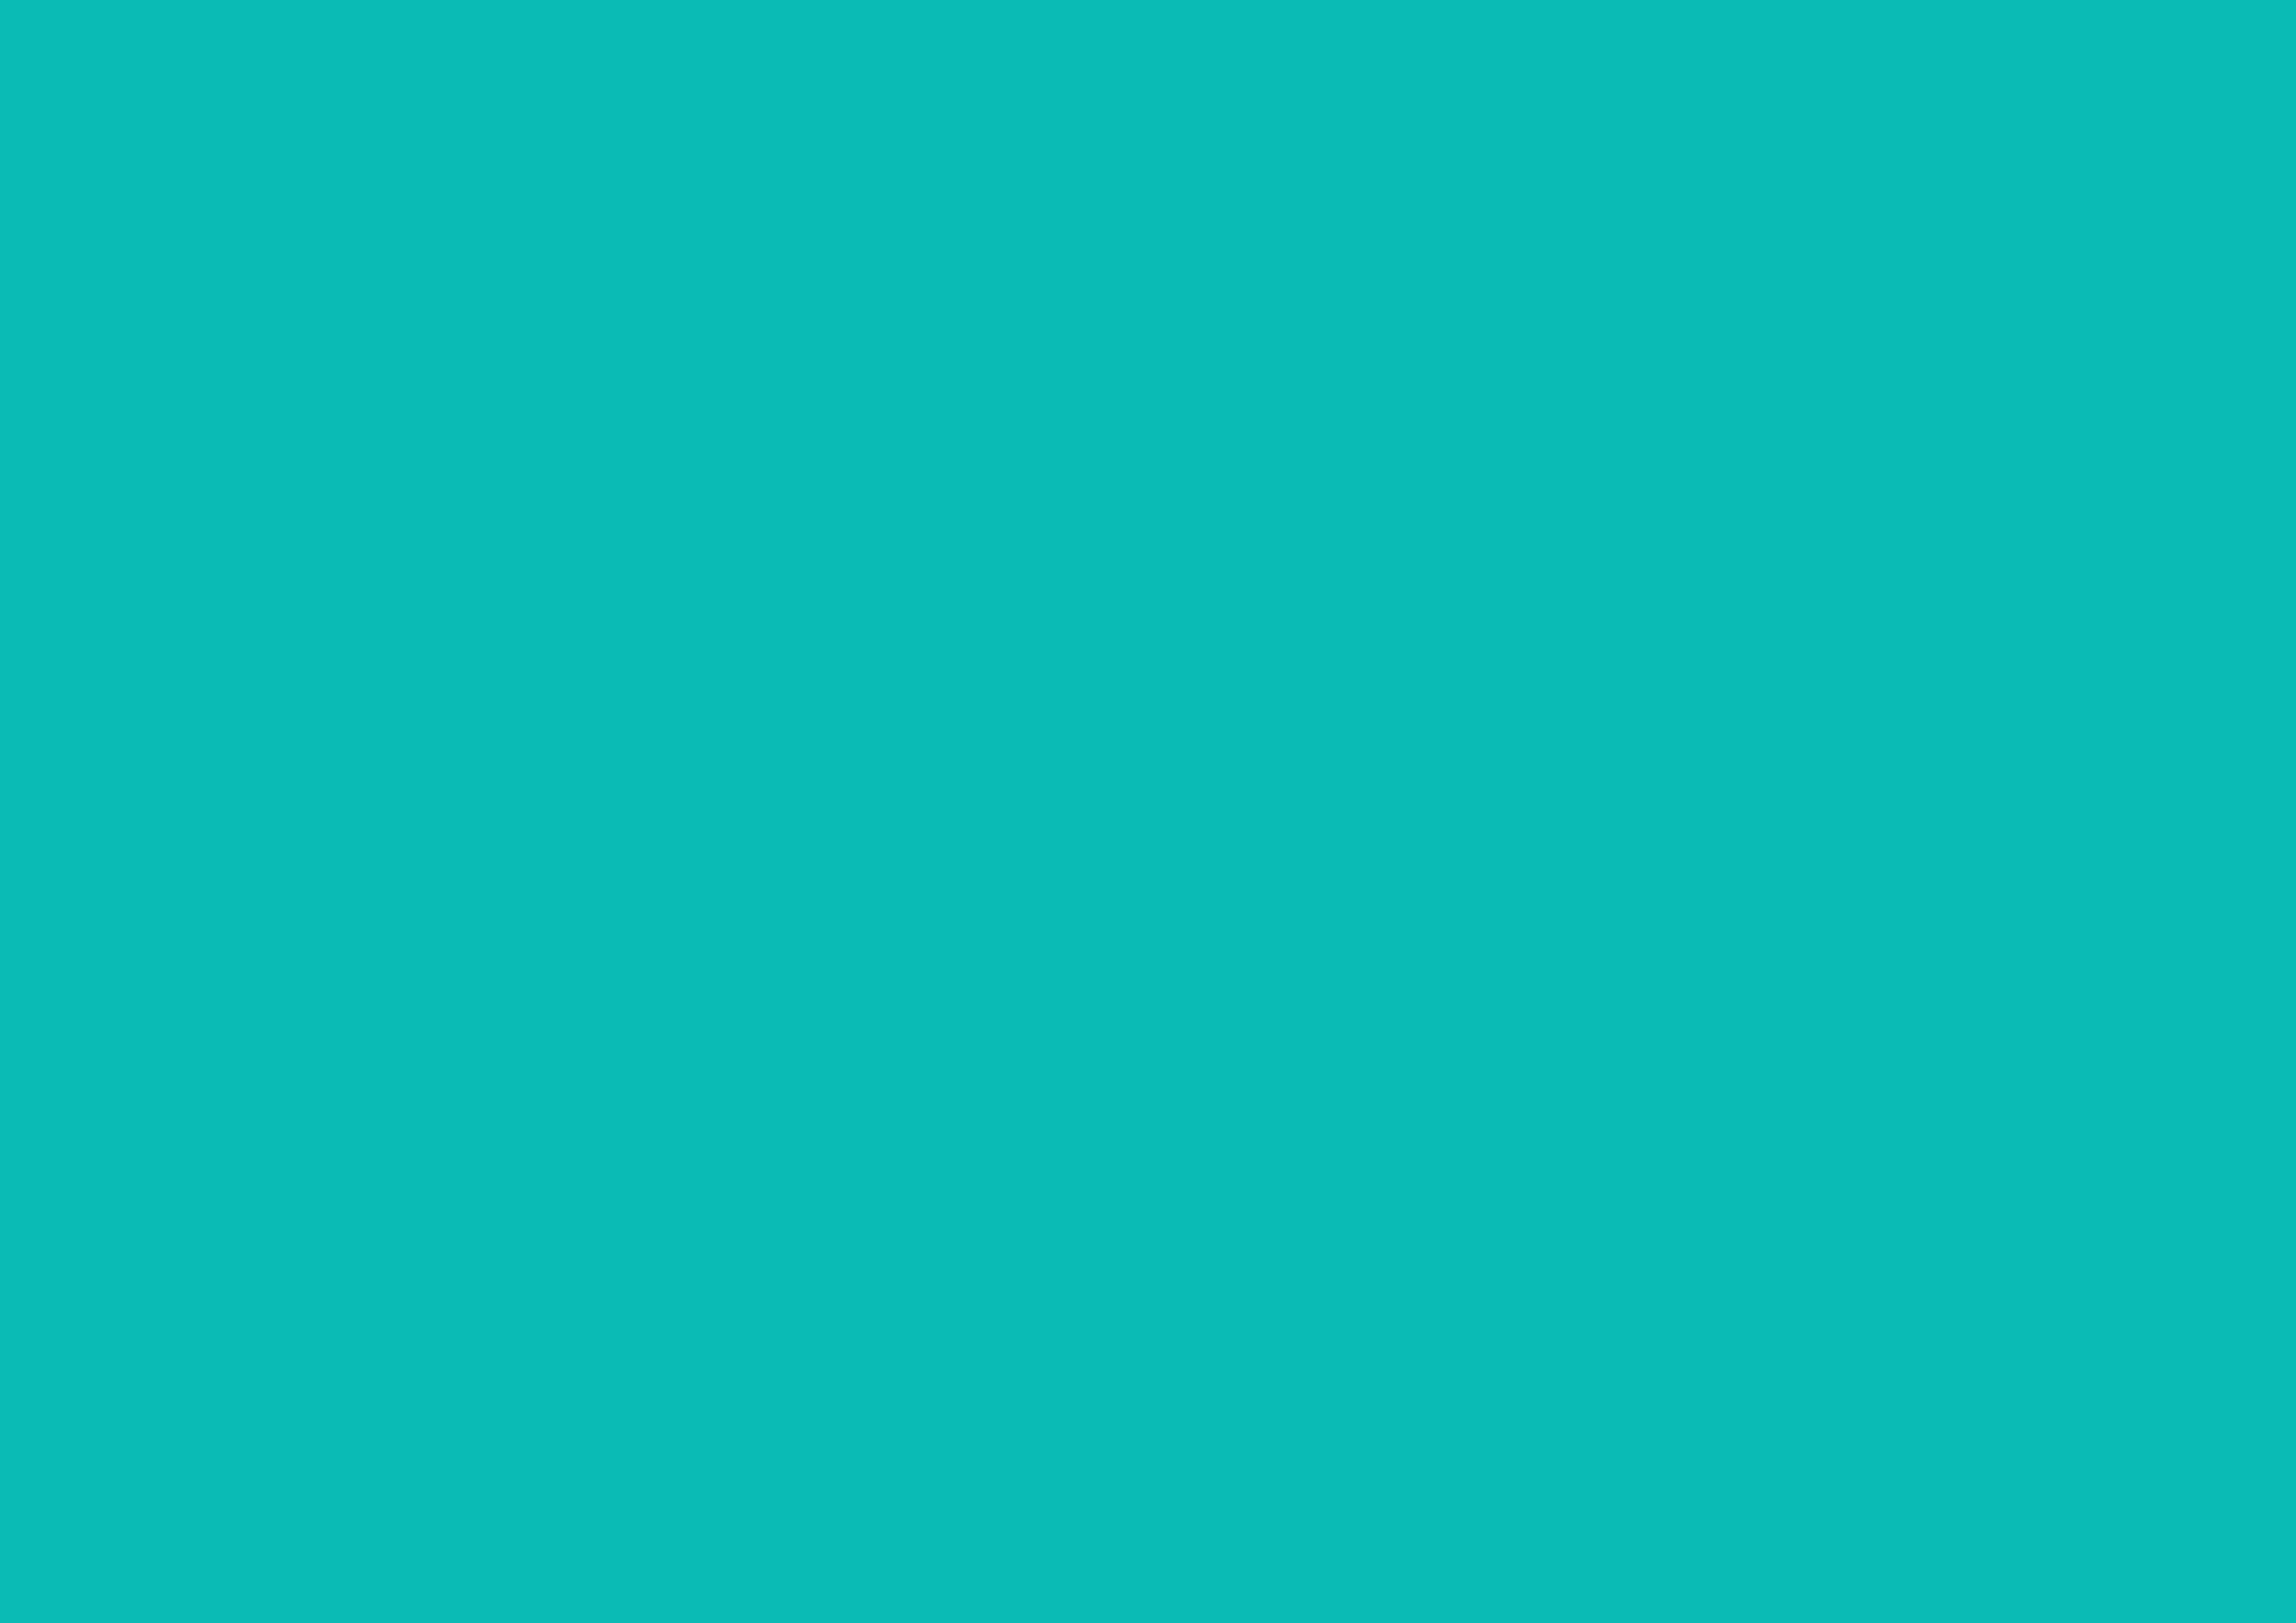 3508x2480 Tiffany Blue Solid Color Background